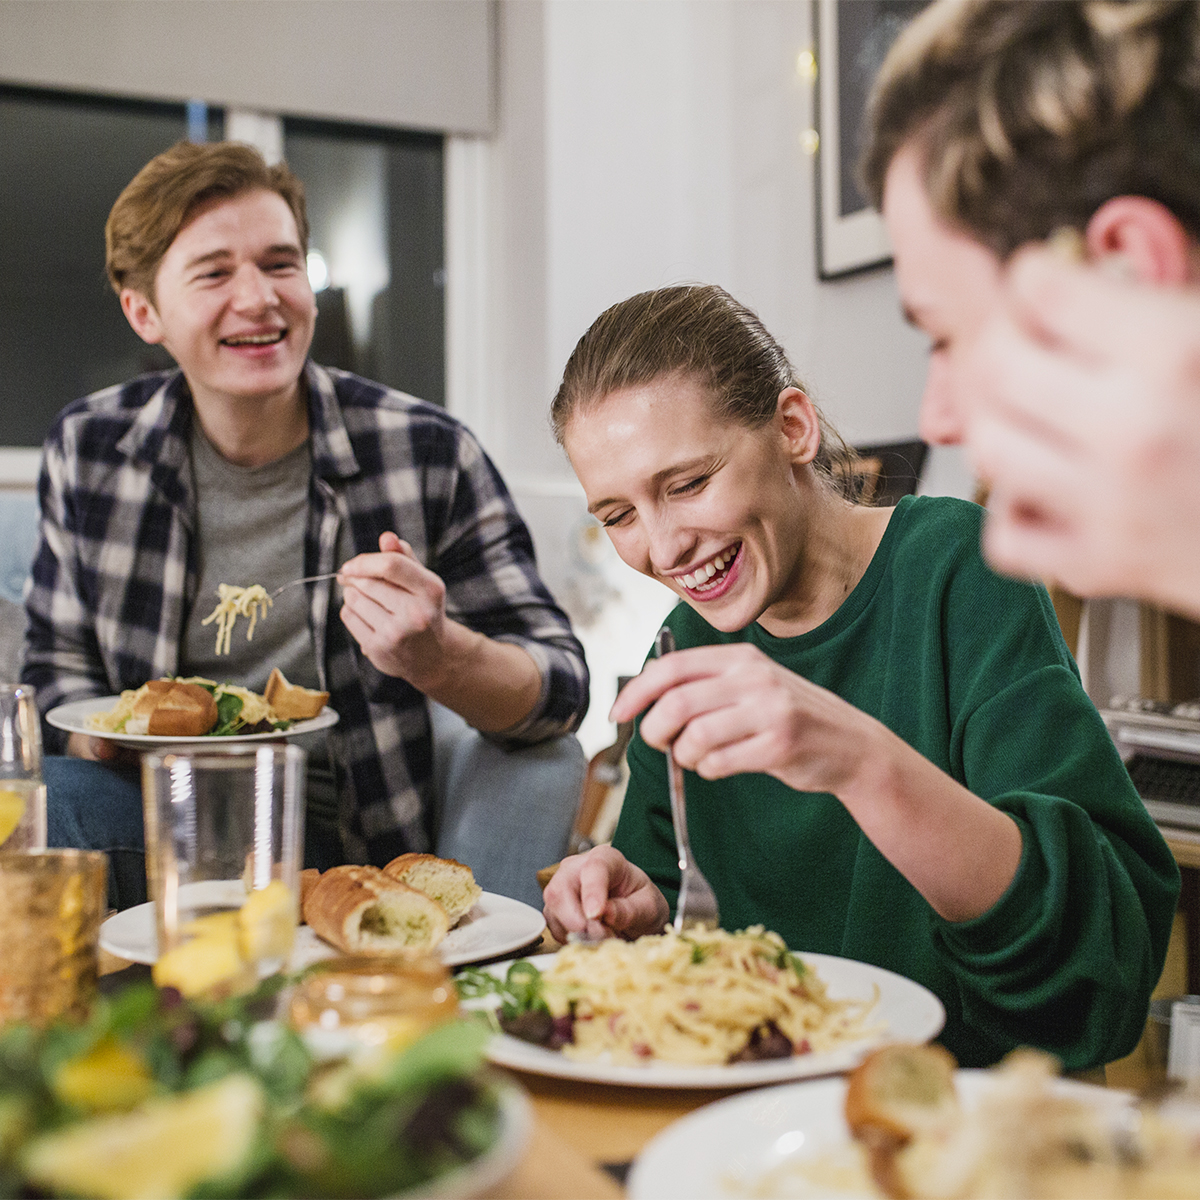 HelloFresh Goes to College: One Student’s Thoughts on the “Easy Prep” Meals